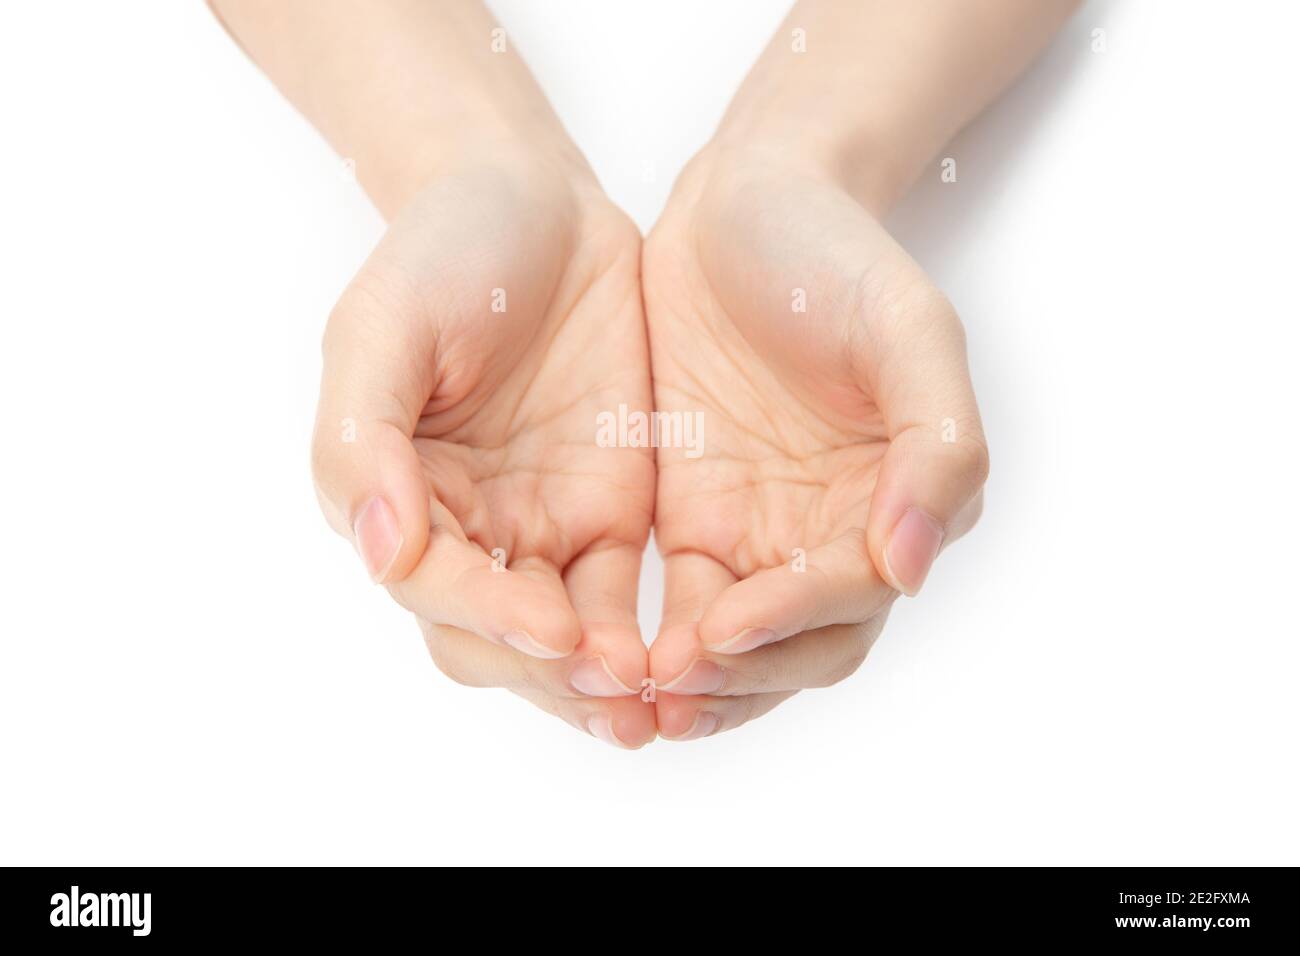 Closeup shot of hands in a begging gesture isolated on a white background Stock Photo